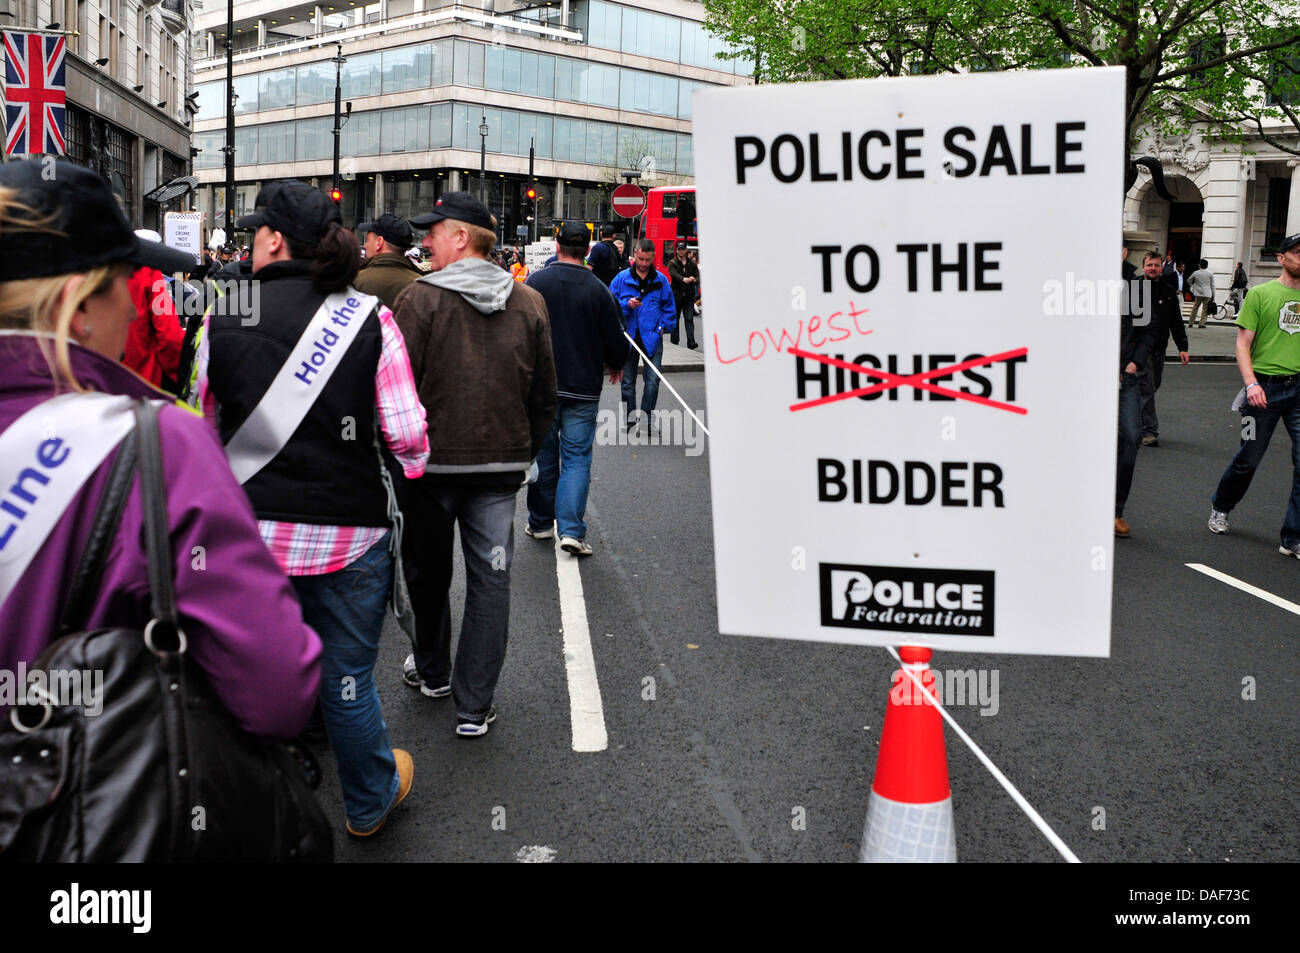 A banner reading 'police sale to the lowest bidder', central London, UK. Stock Photo